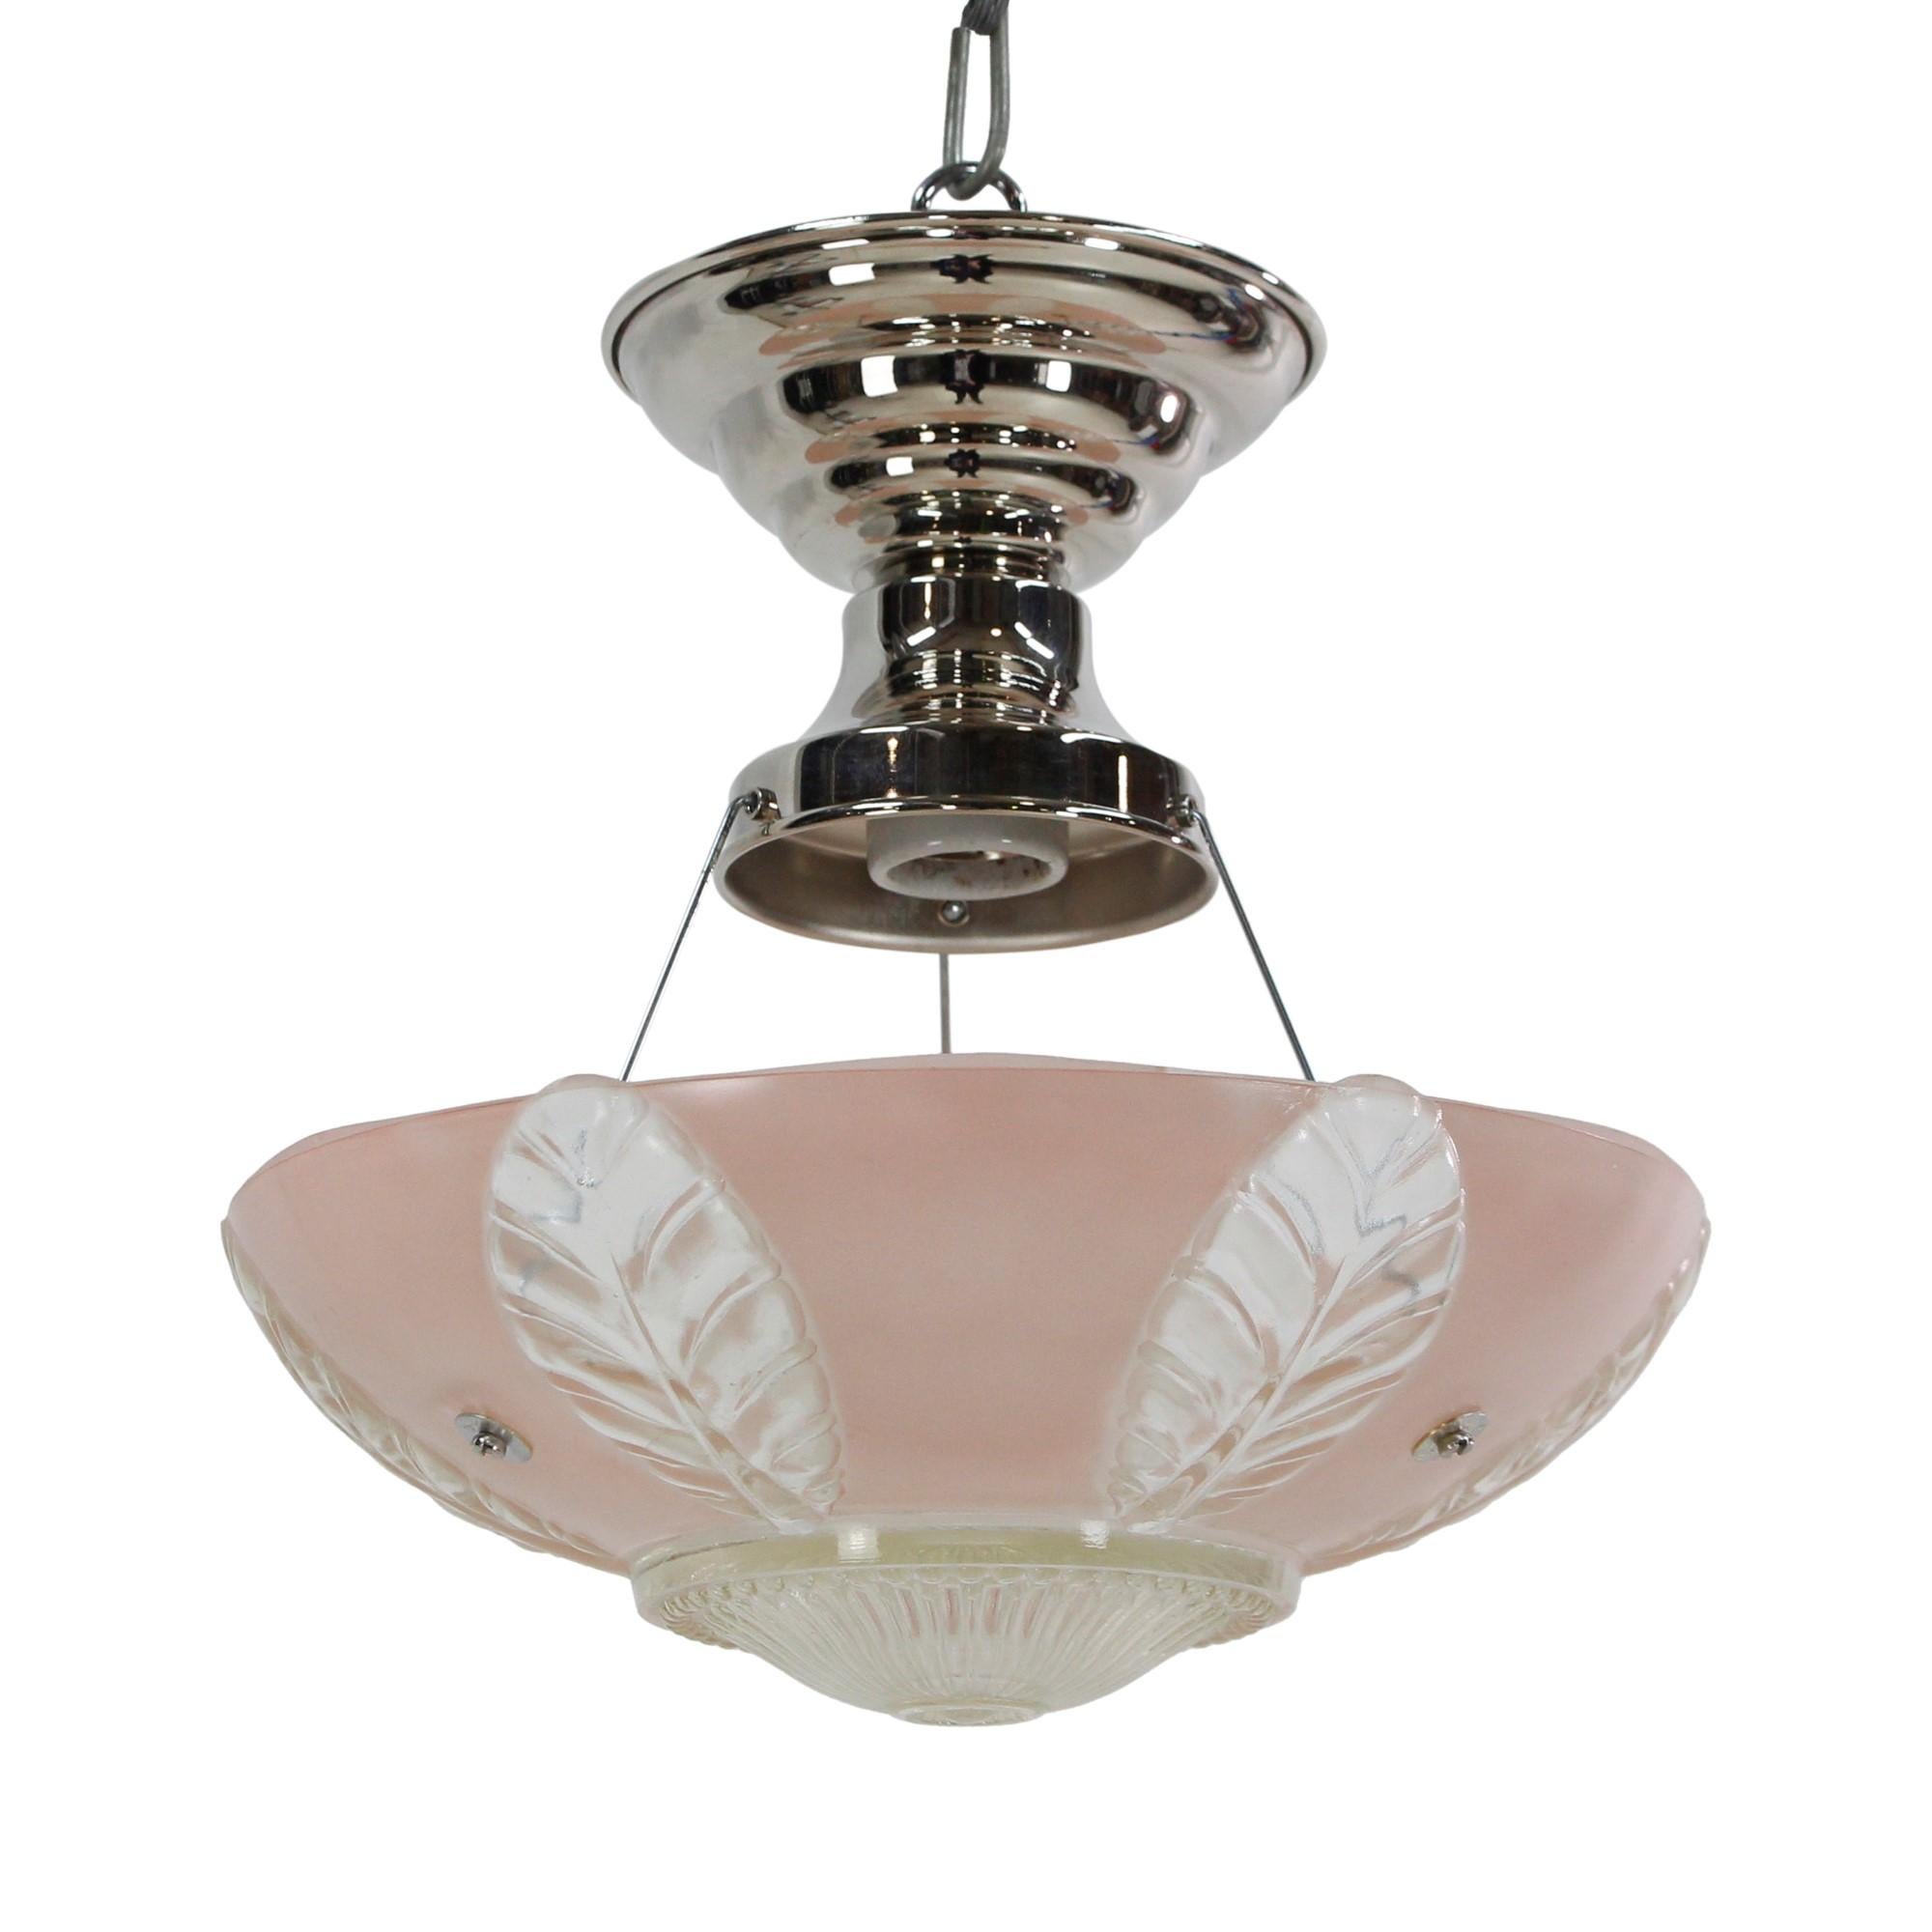 1940's semi-flush mount dish light featuring a pink and clear glass shade with foliage details and clear glass ribbed details on bottom. Comes with new polished nickel hardware. This can be seen at our 400 Gilligan St location in Scranton, PA.